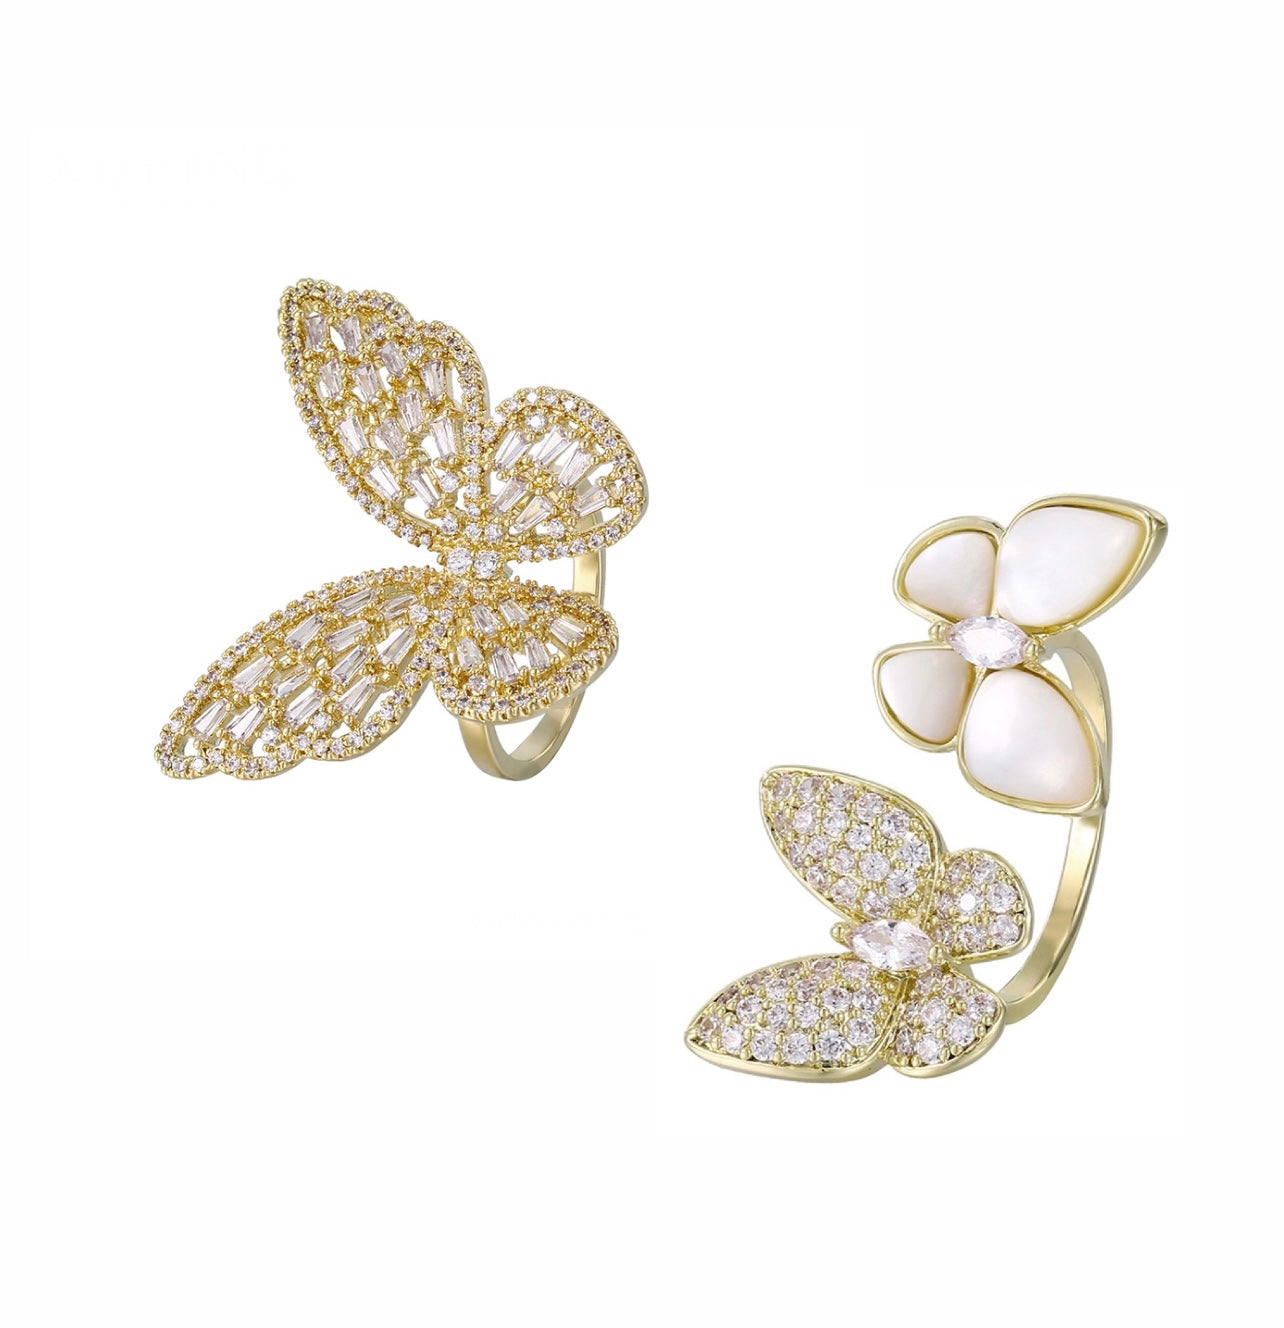 14k Gold Plated Two Butterfly Rings Set